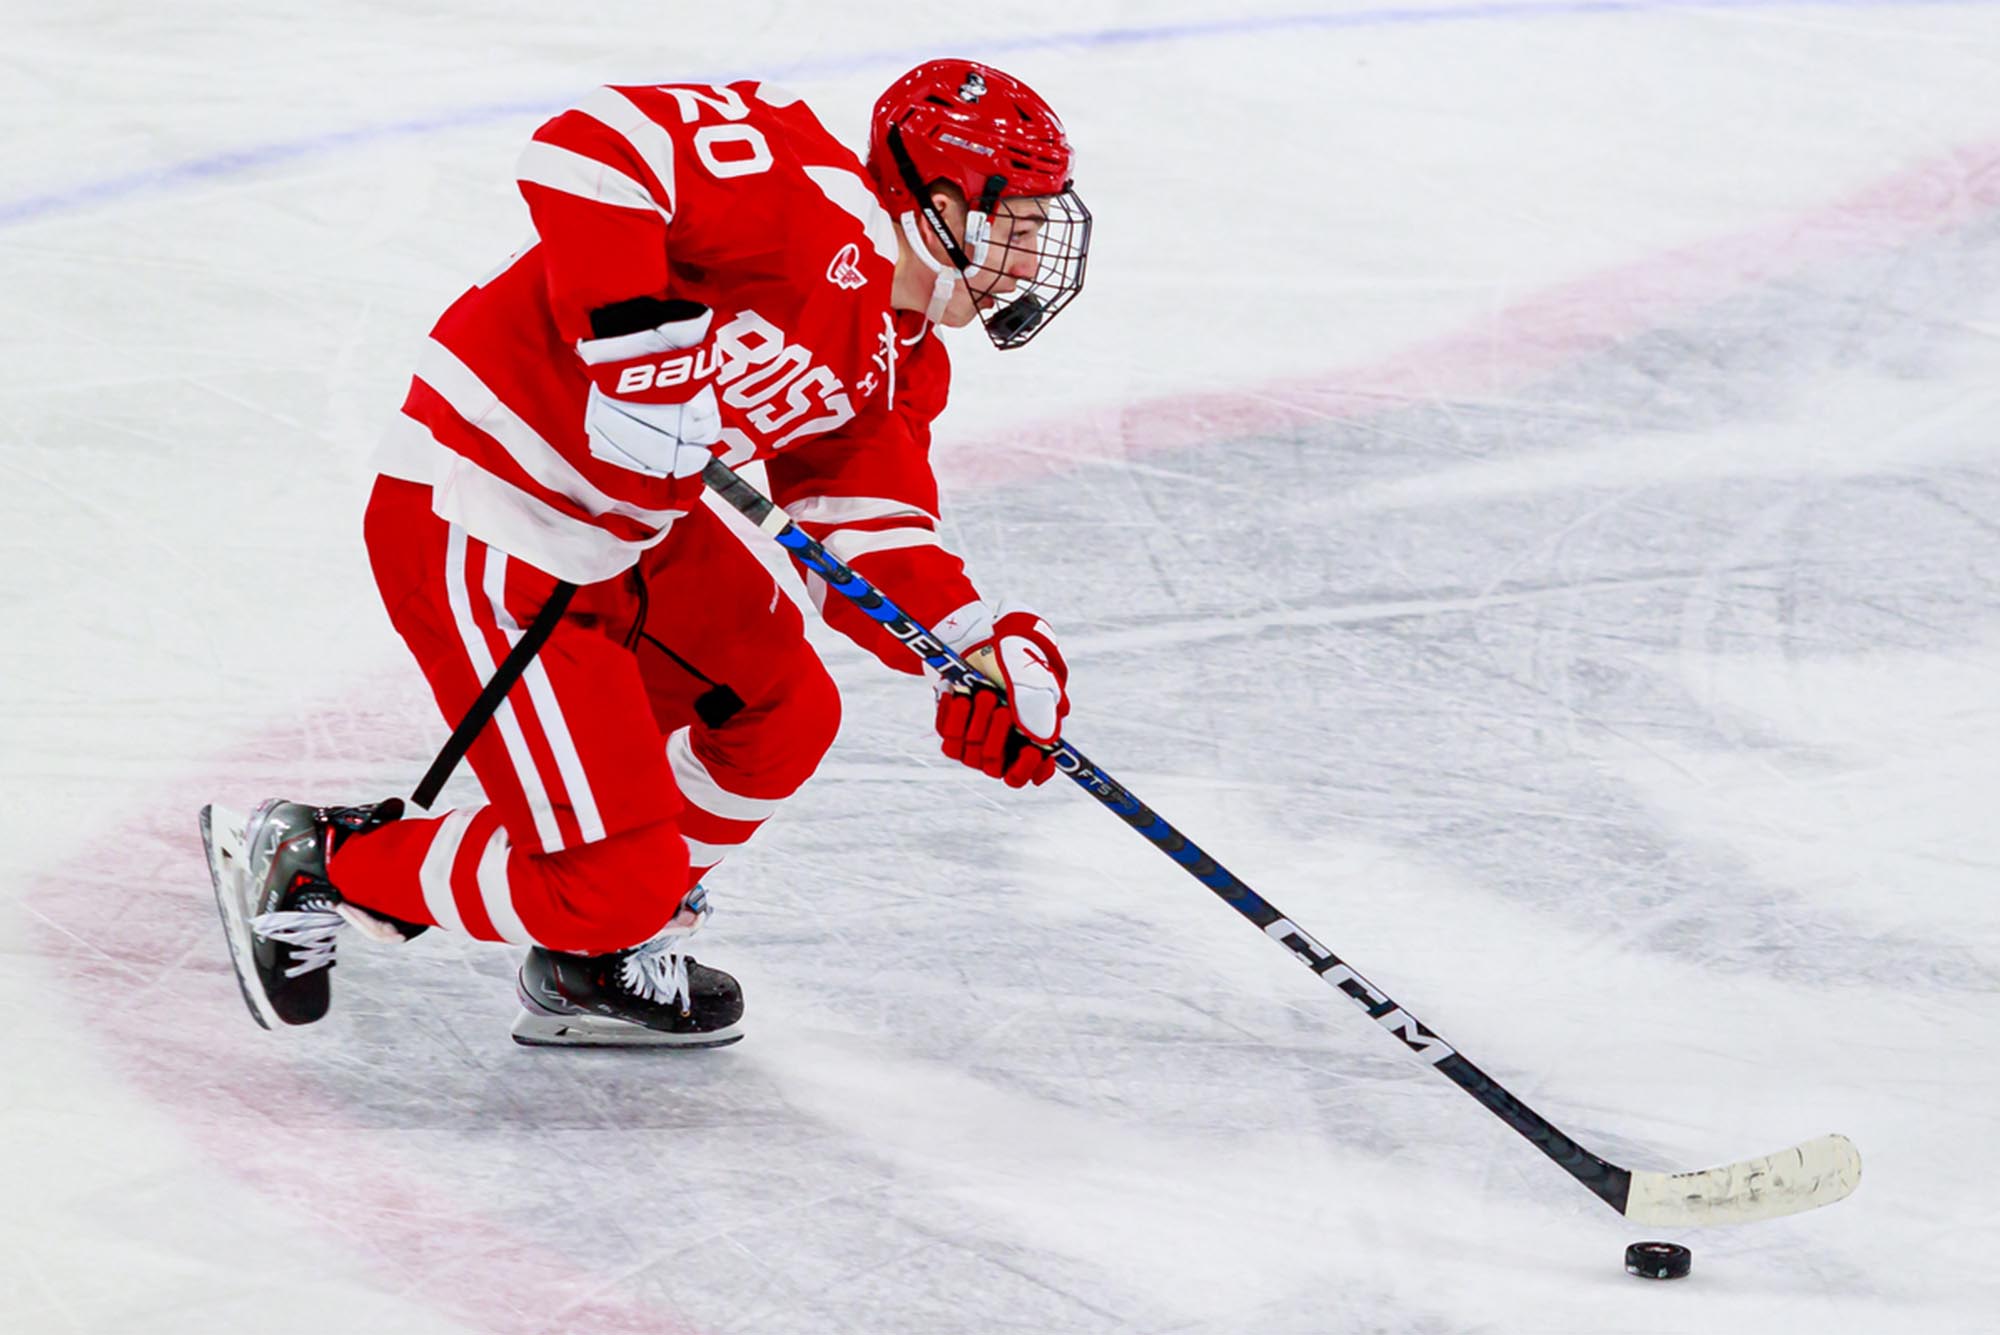 Lane Hutson, pictured here skating with the puck, is a two-time Hockey East Defender of the Month. “Lane is an exceptional defensive talent—everybody knows what he can do offensively and defensively too—he’s spectacular,” says teammate Devin Kaplan (CAS’26). [Credit: Kyle Prudhomme]